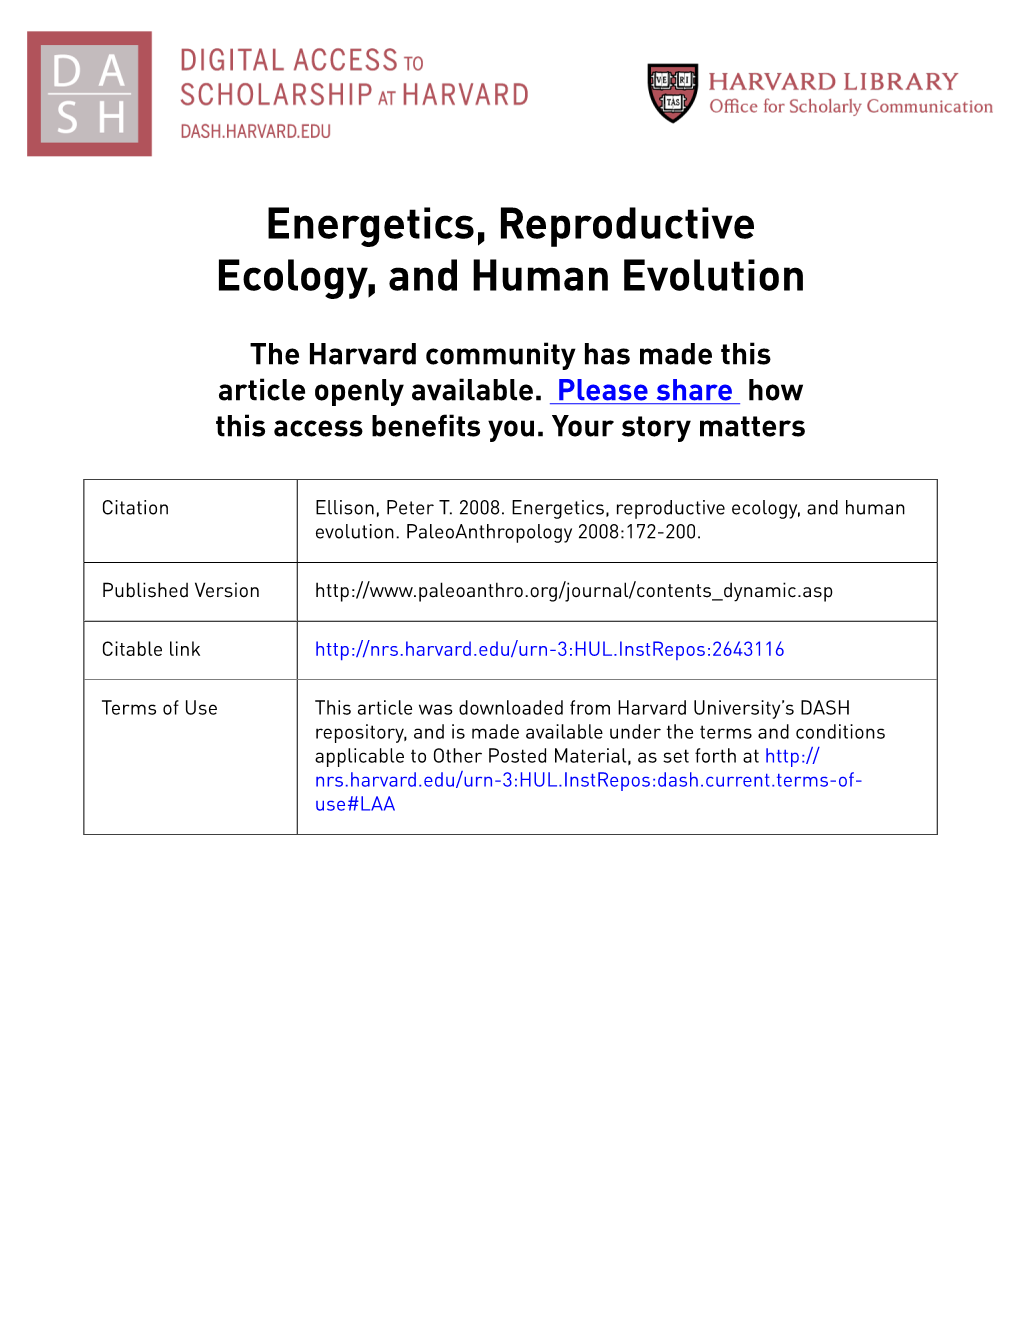 Energetics, Reproductive Ecology, and Human Evolution